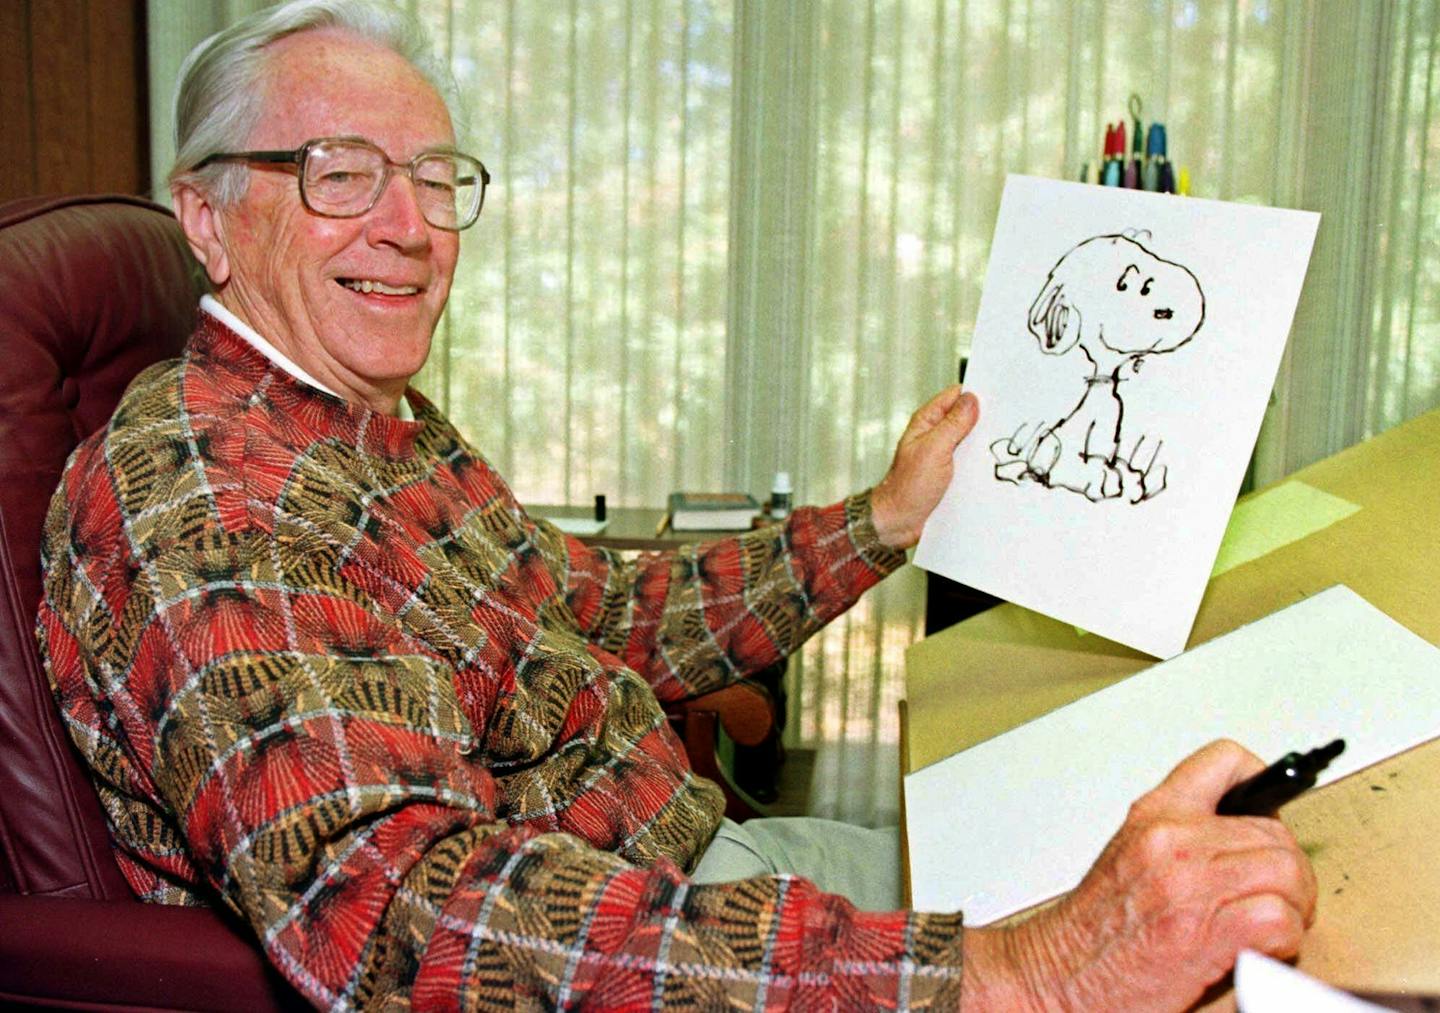 Charles M. Schulz - Just remember, once you're over the